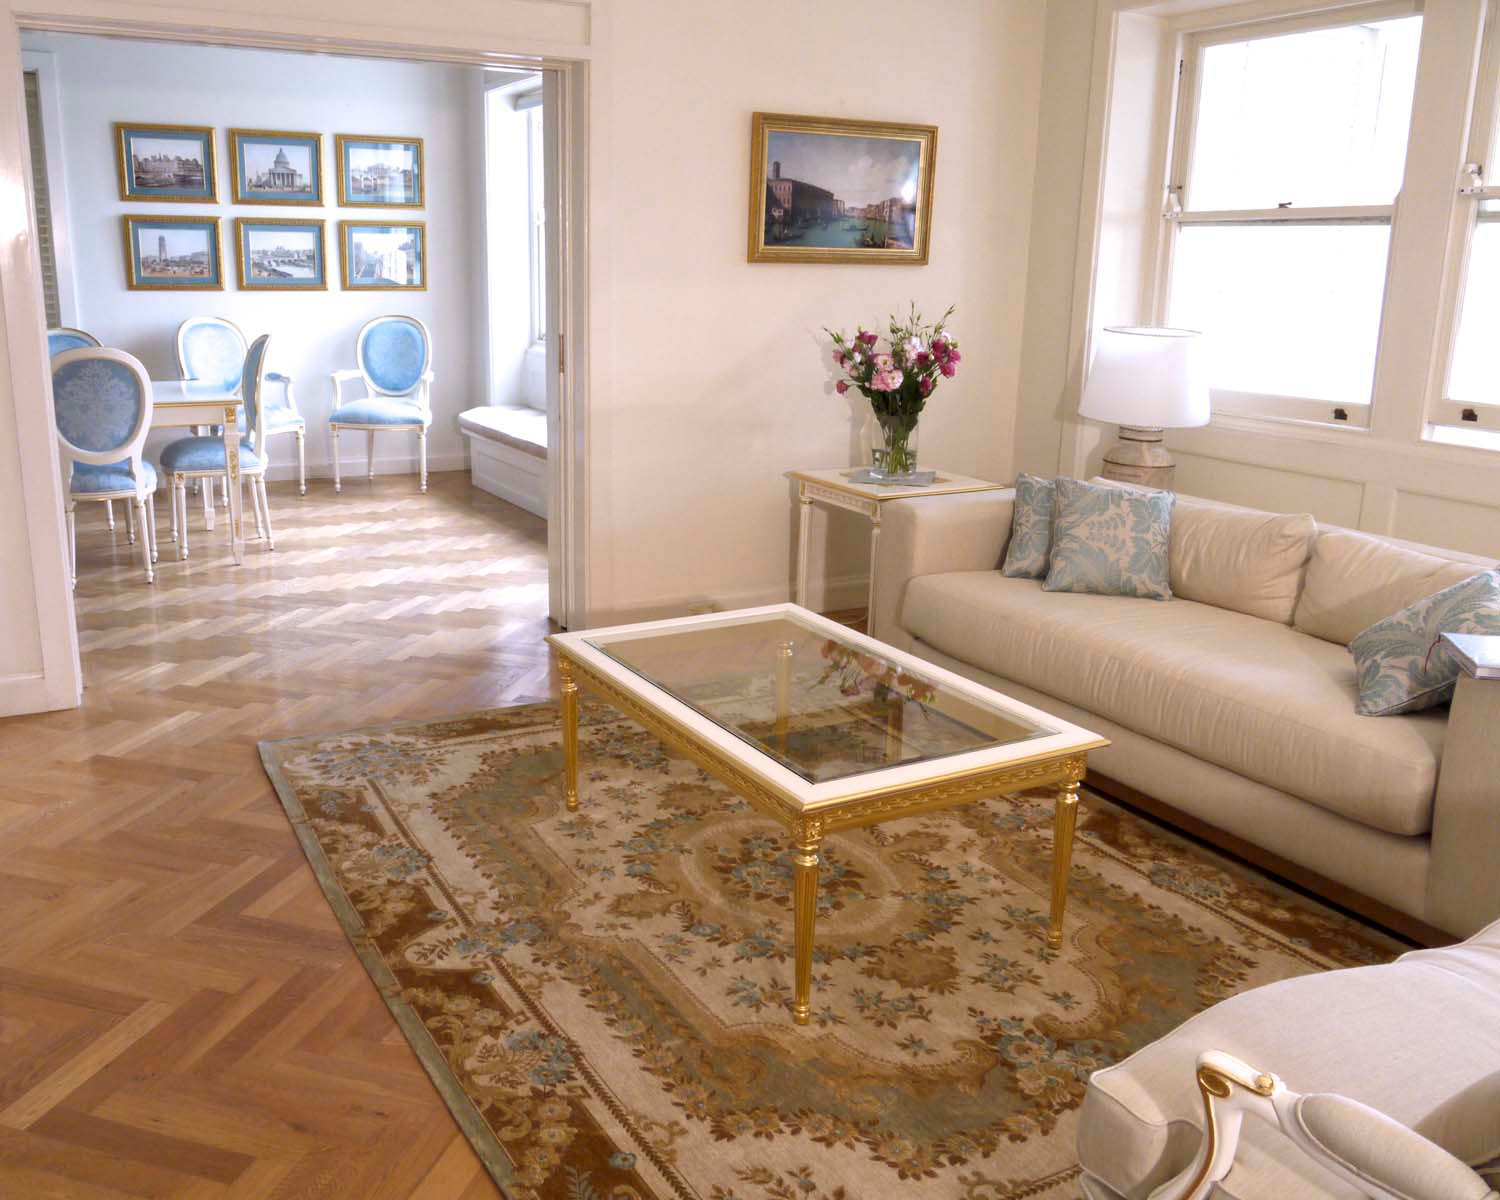 7 A parisian style interior designed lounge room with coffee table and rug